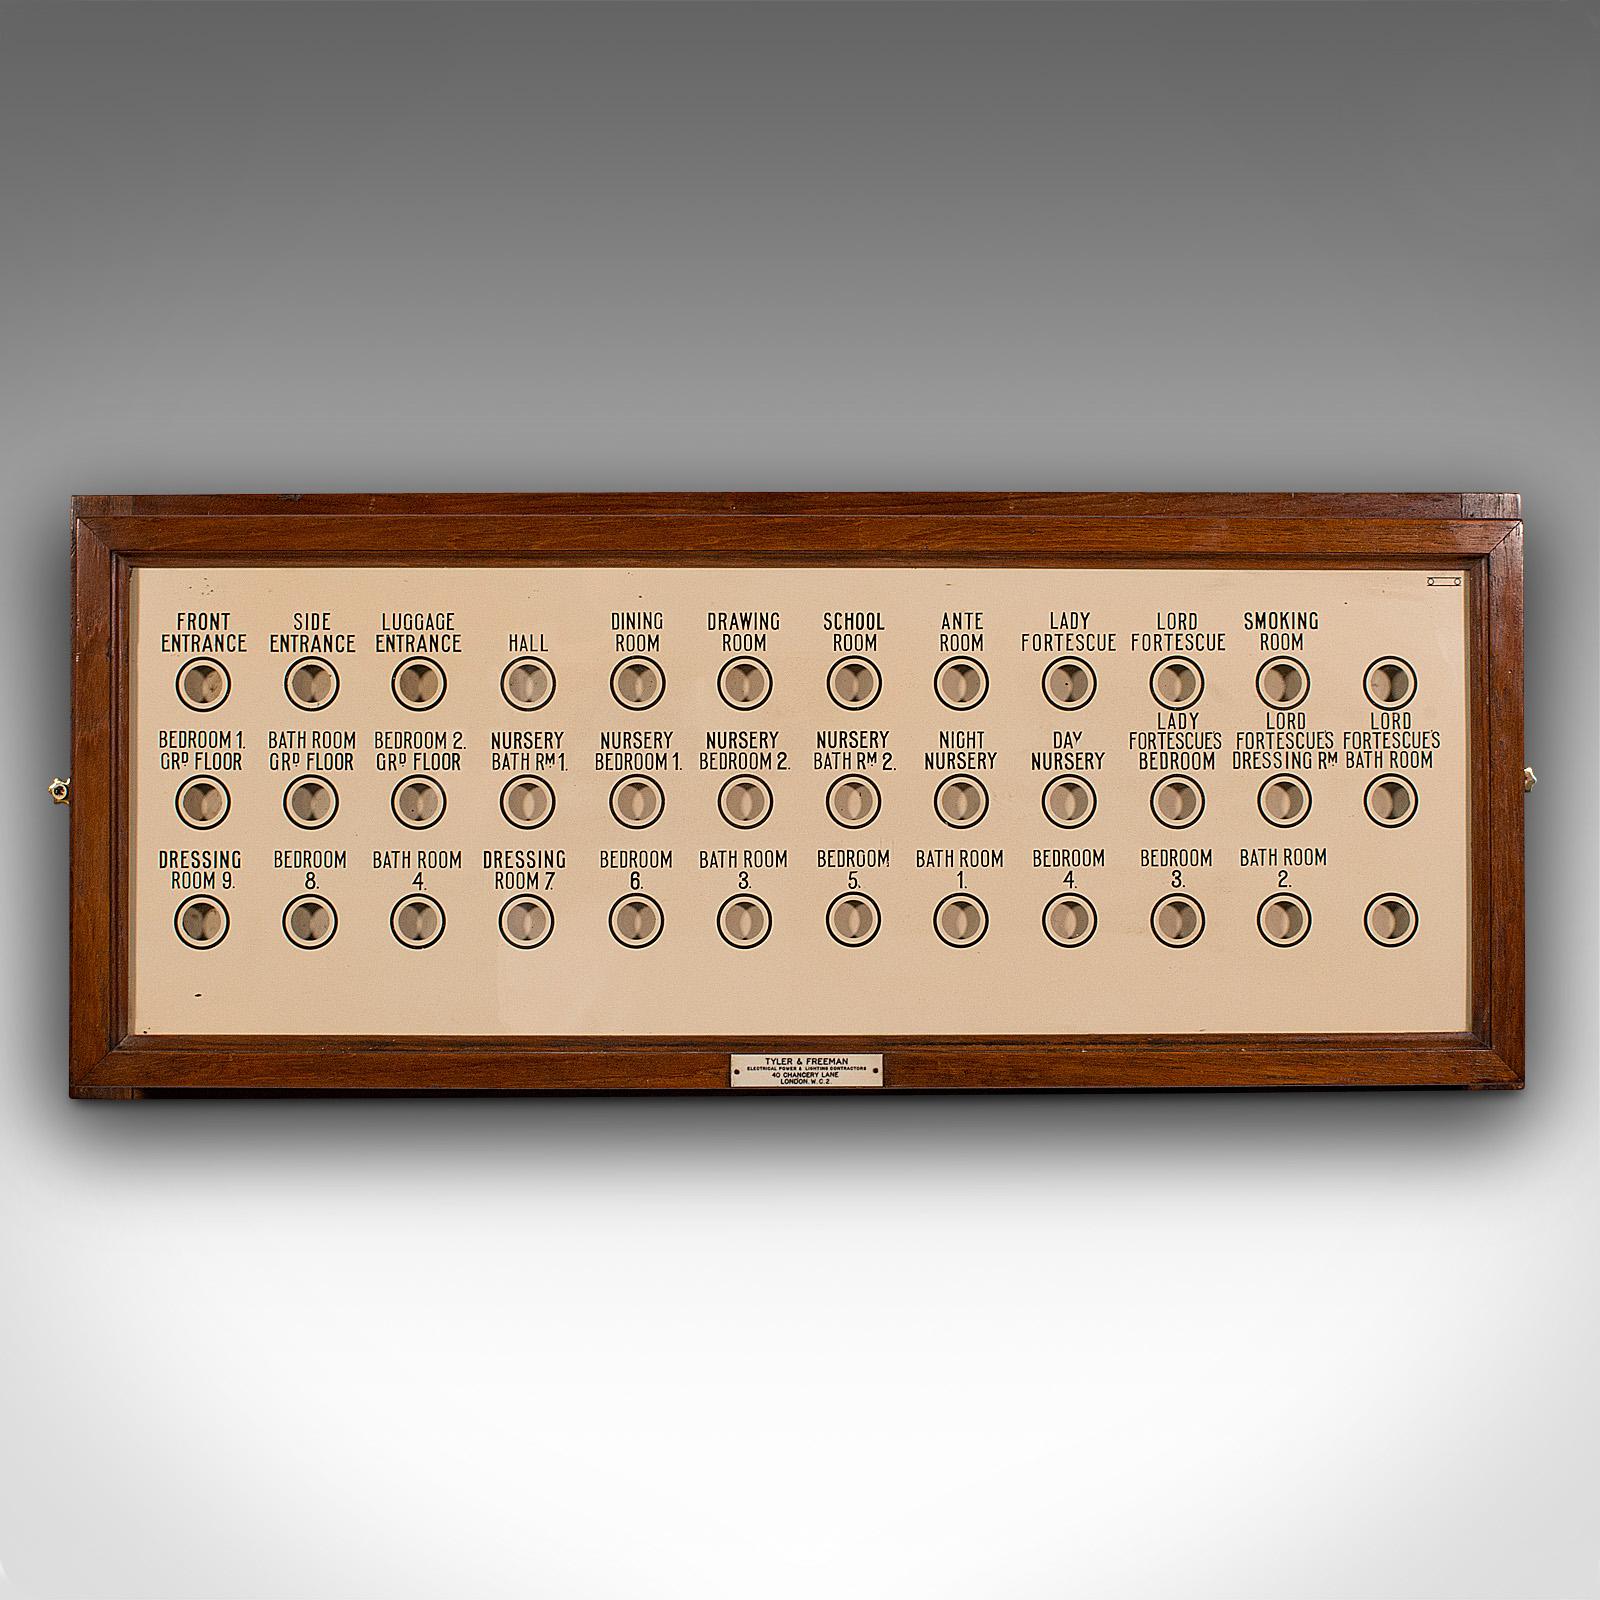 This is a large antique country house butler's bell board. An English pitch pine and glass room alarm panel, dating to the late Victorian period, circa 1900.

Of superb proportion and fascinating stately home appeal
Displays a desirable aged